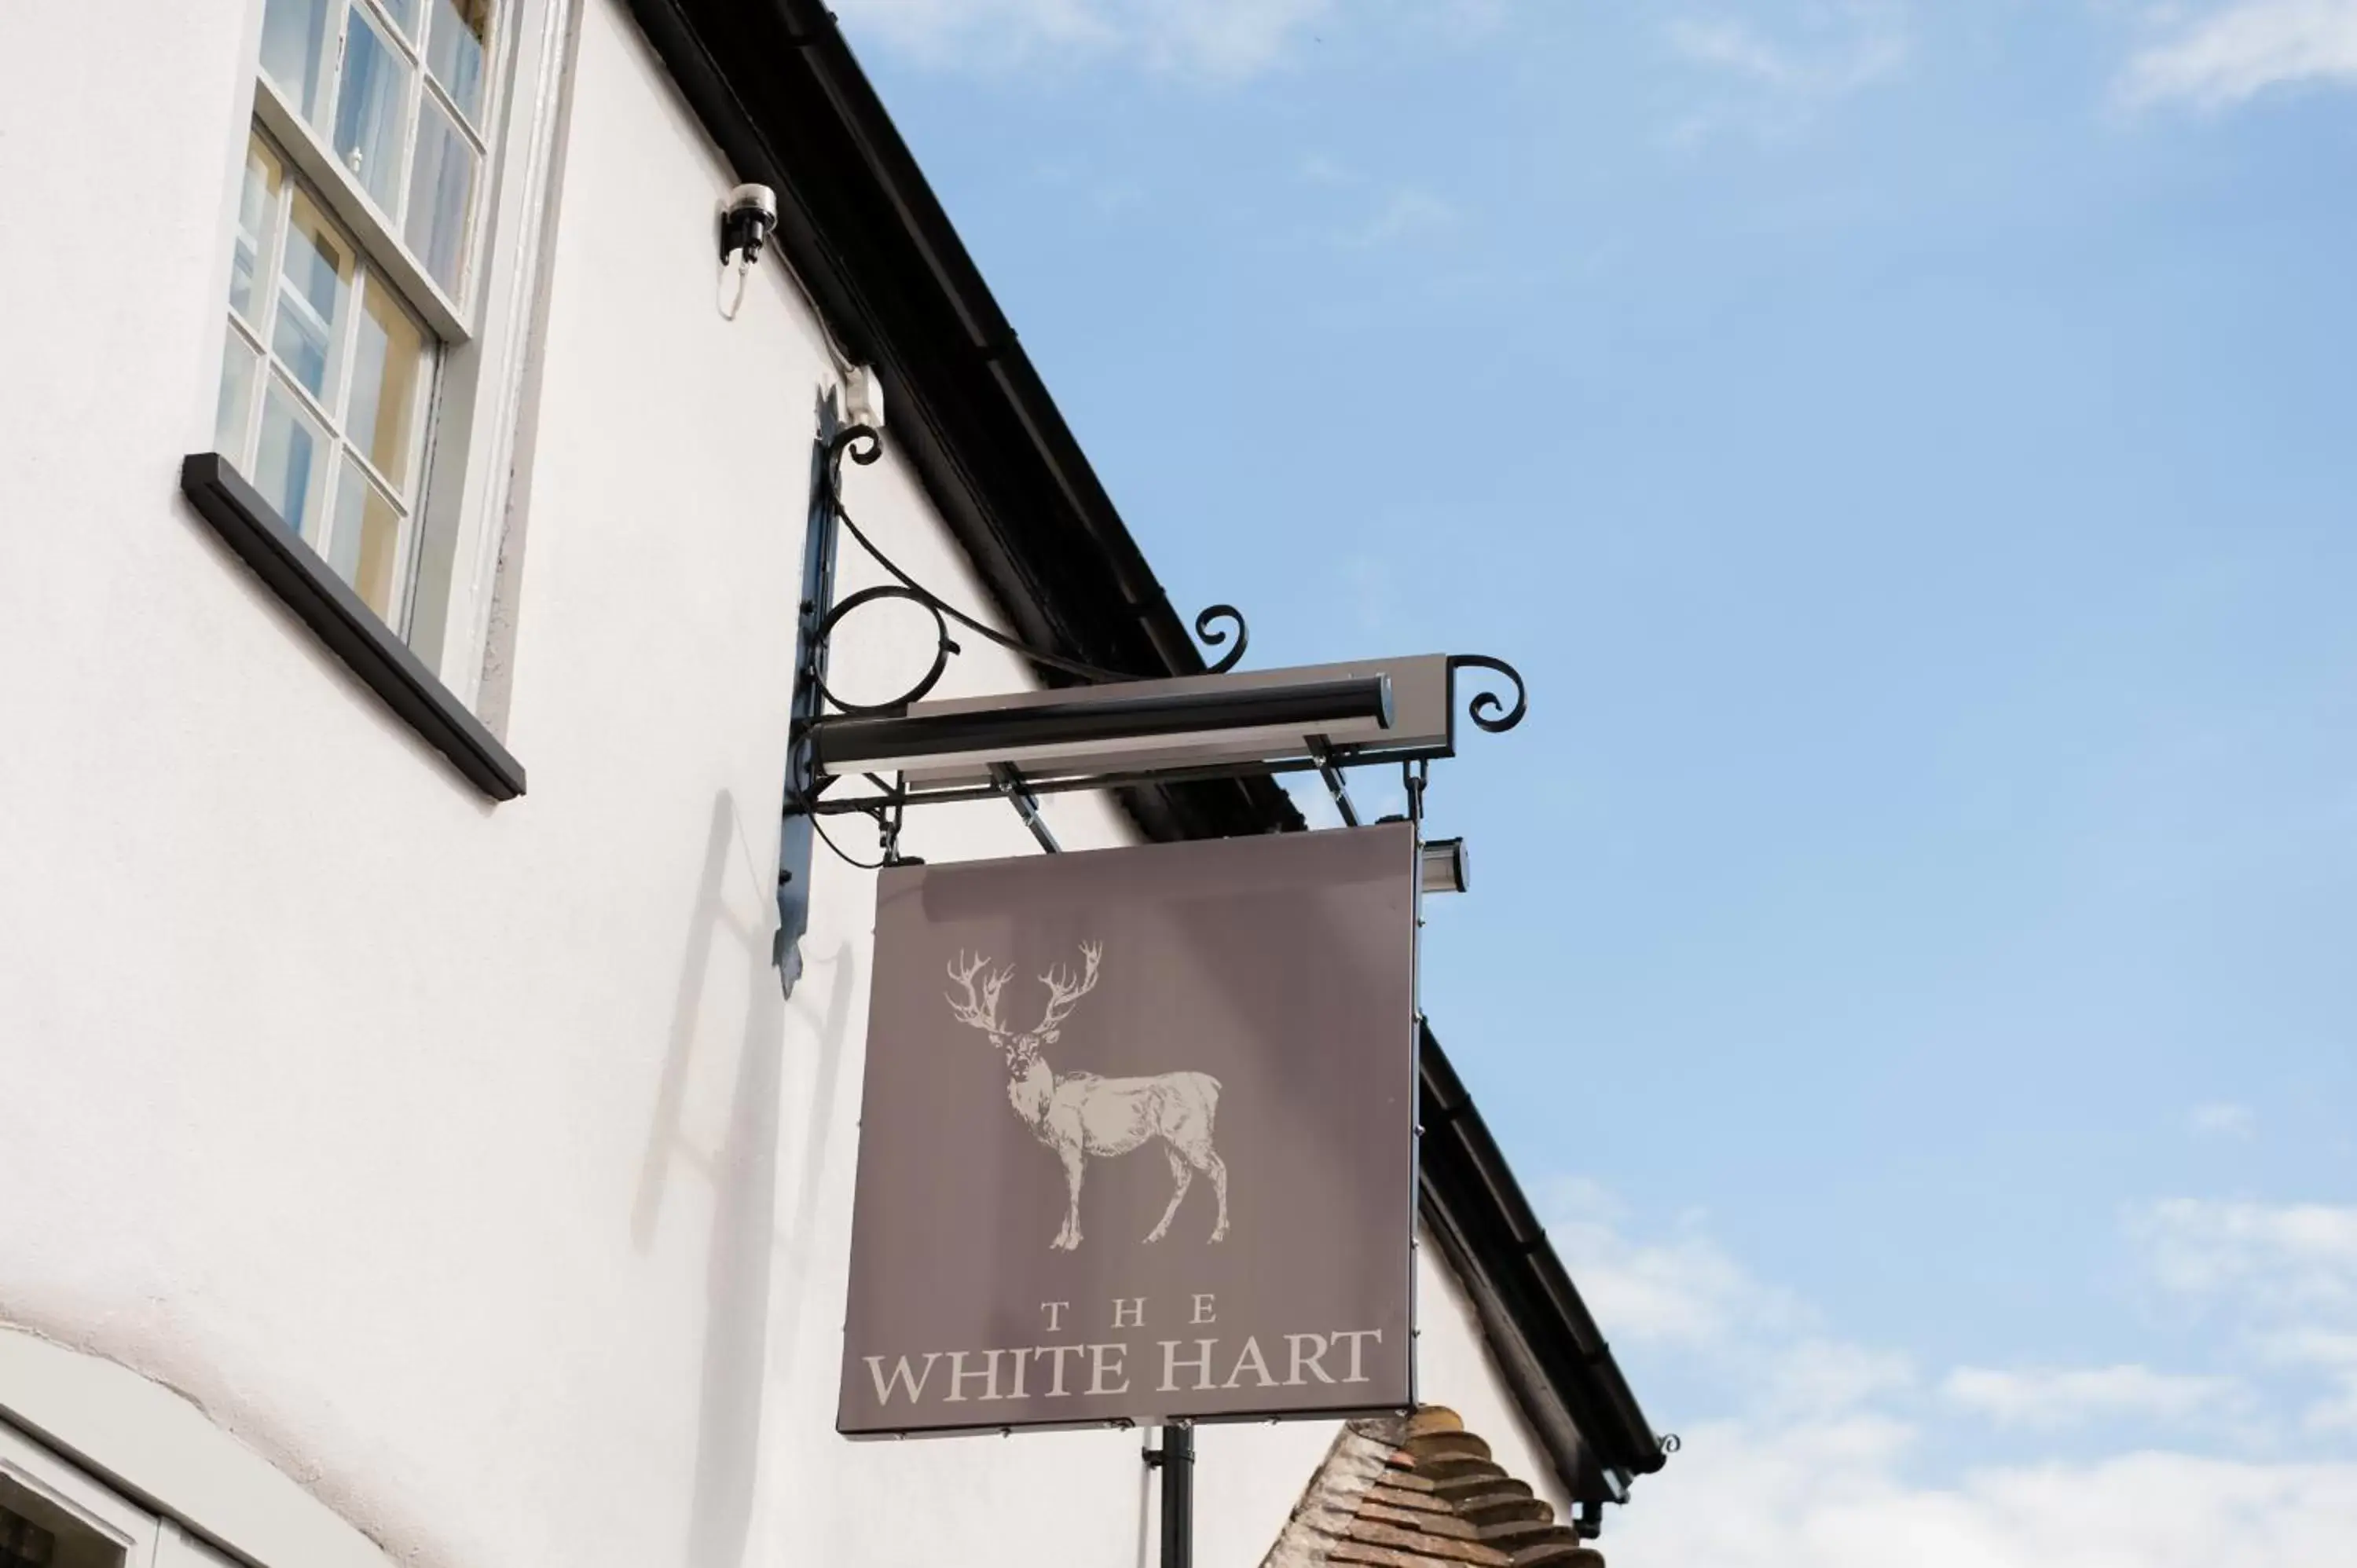 Property building in The White Hart, Overton